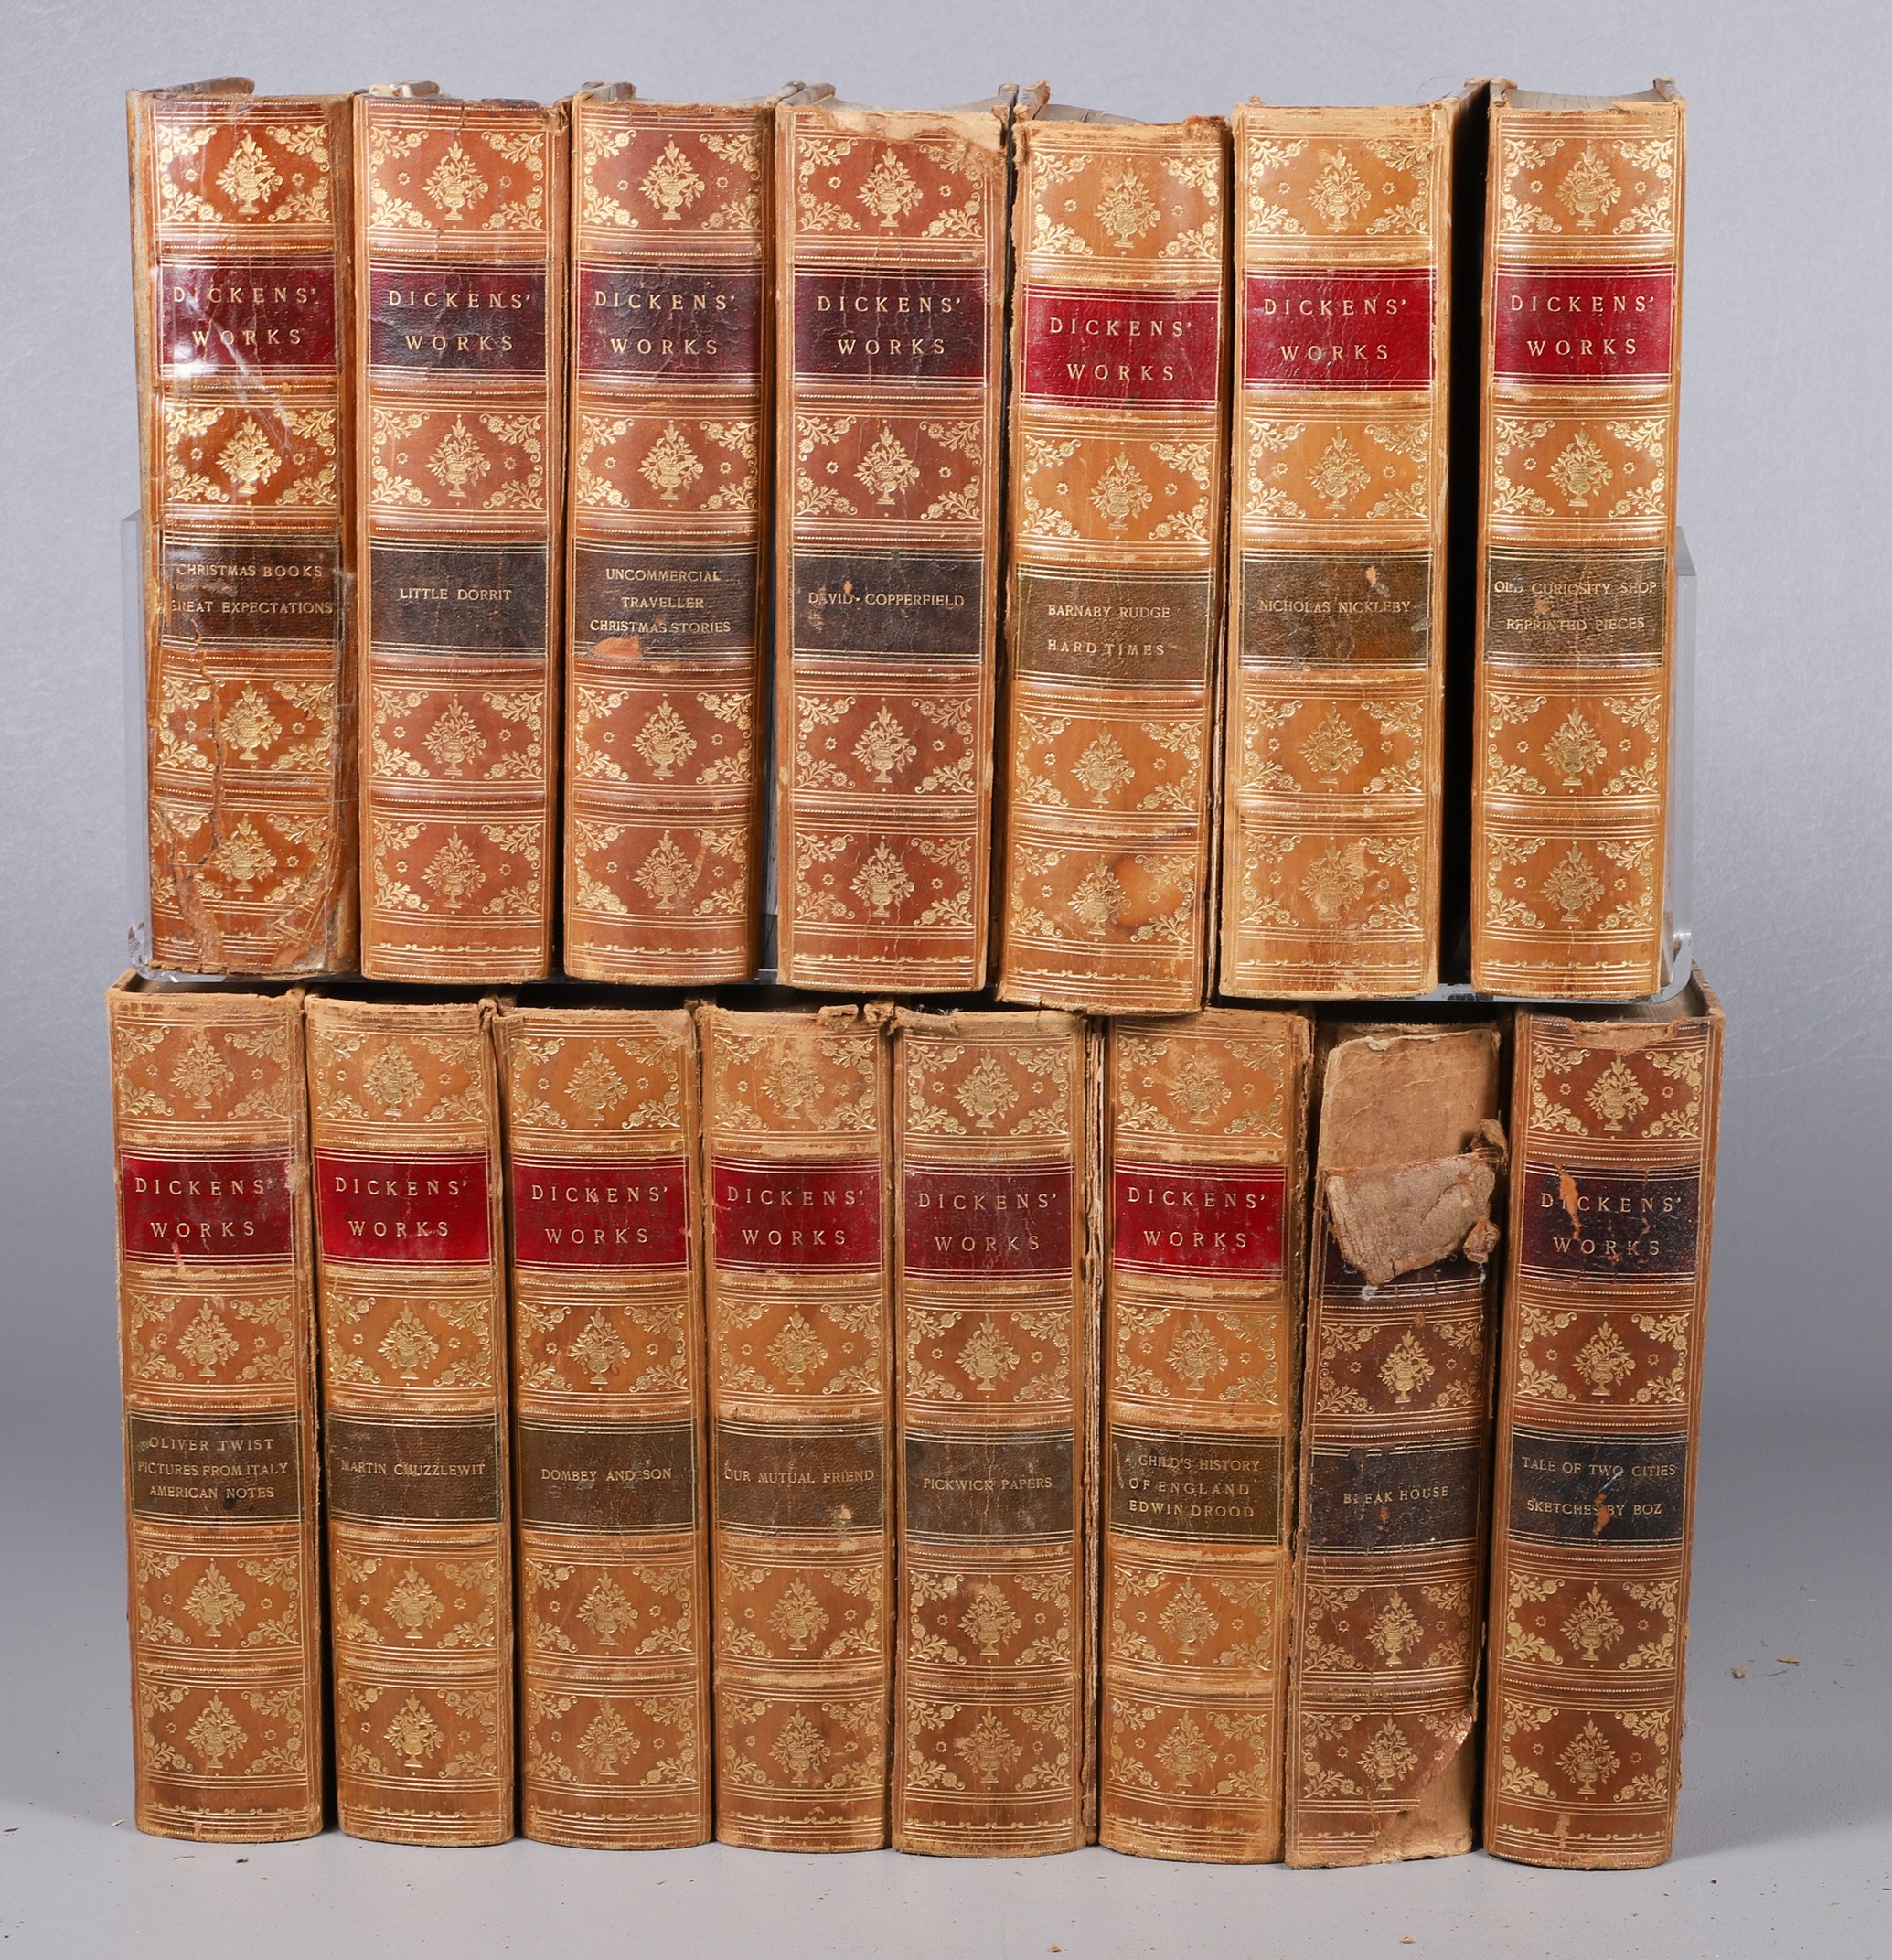 A fifteen-volume set of the works